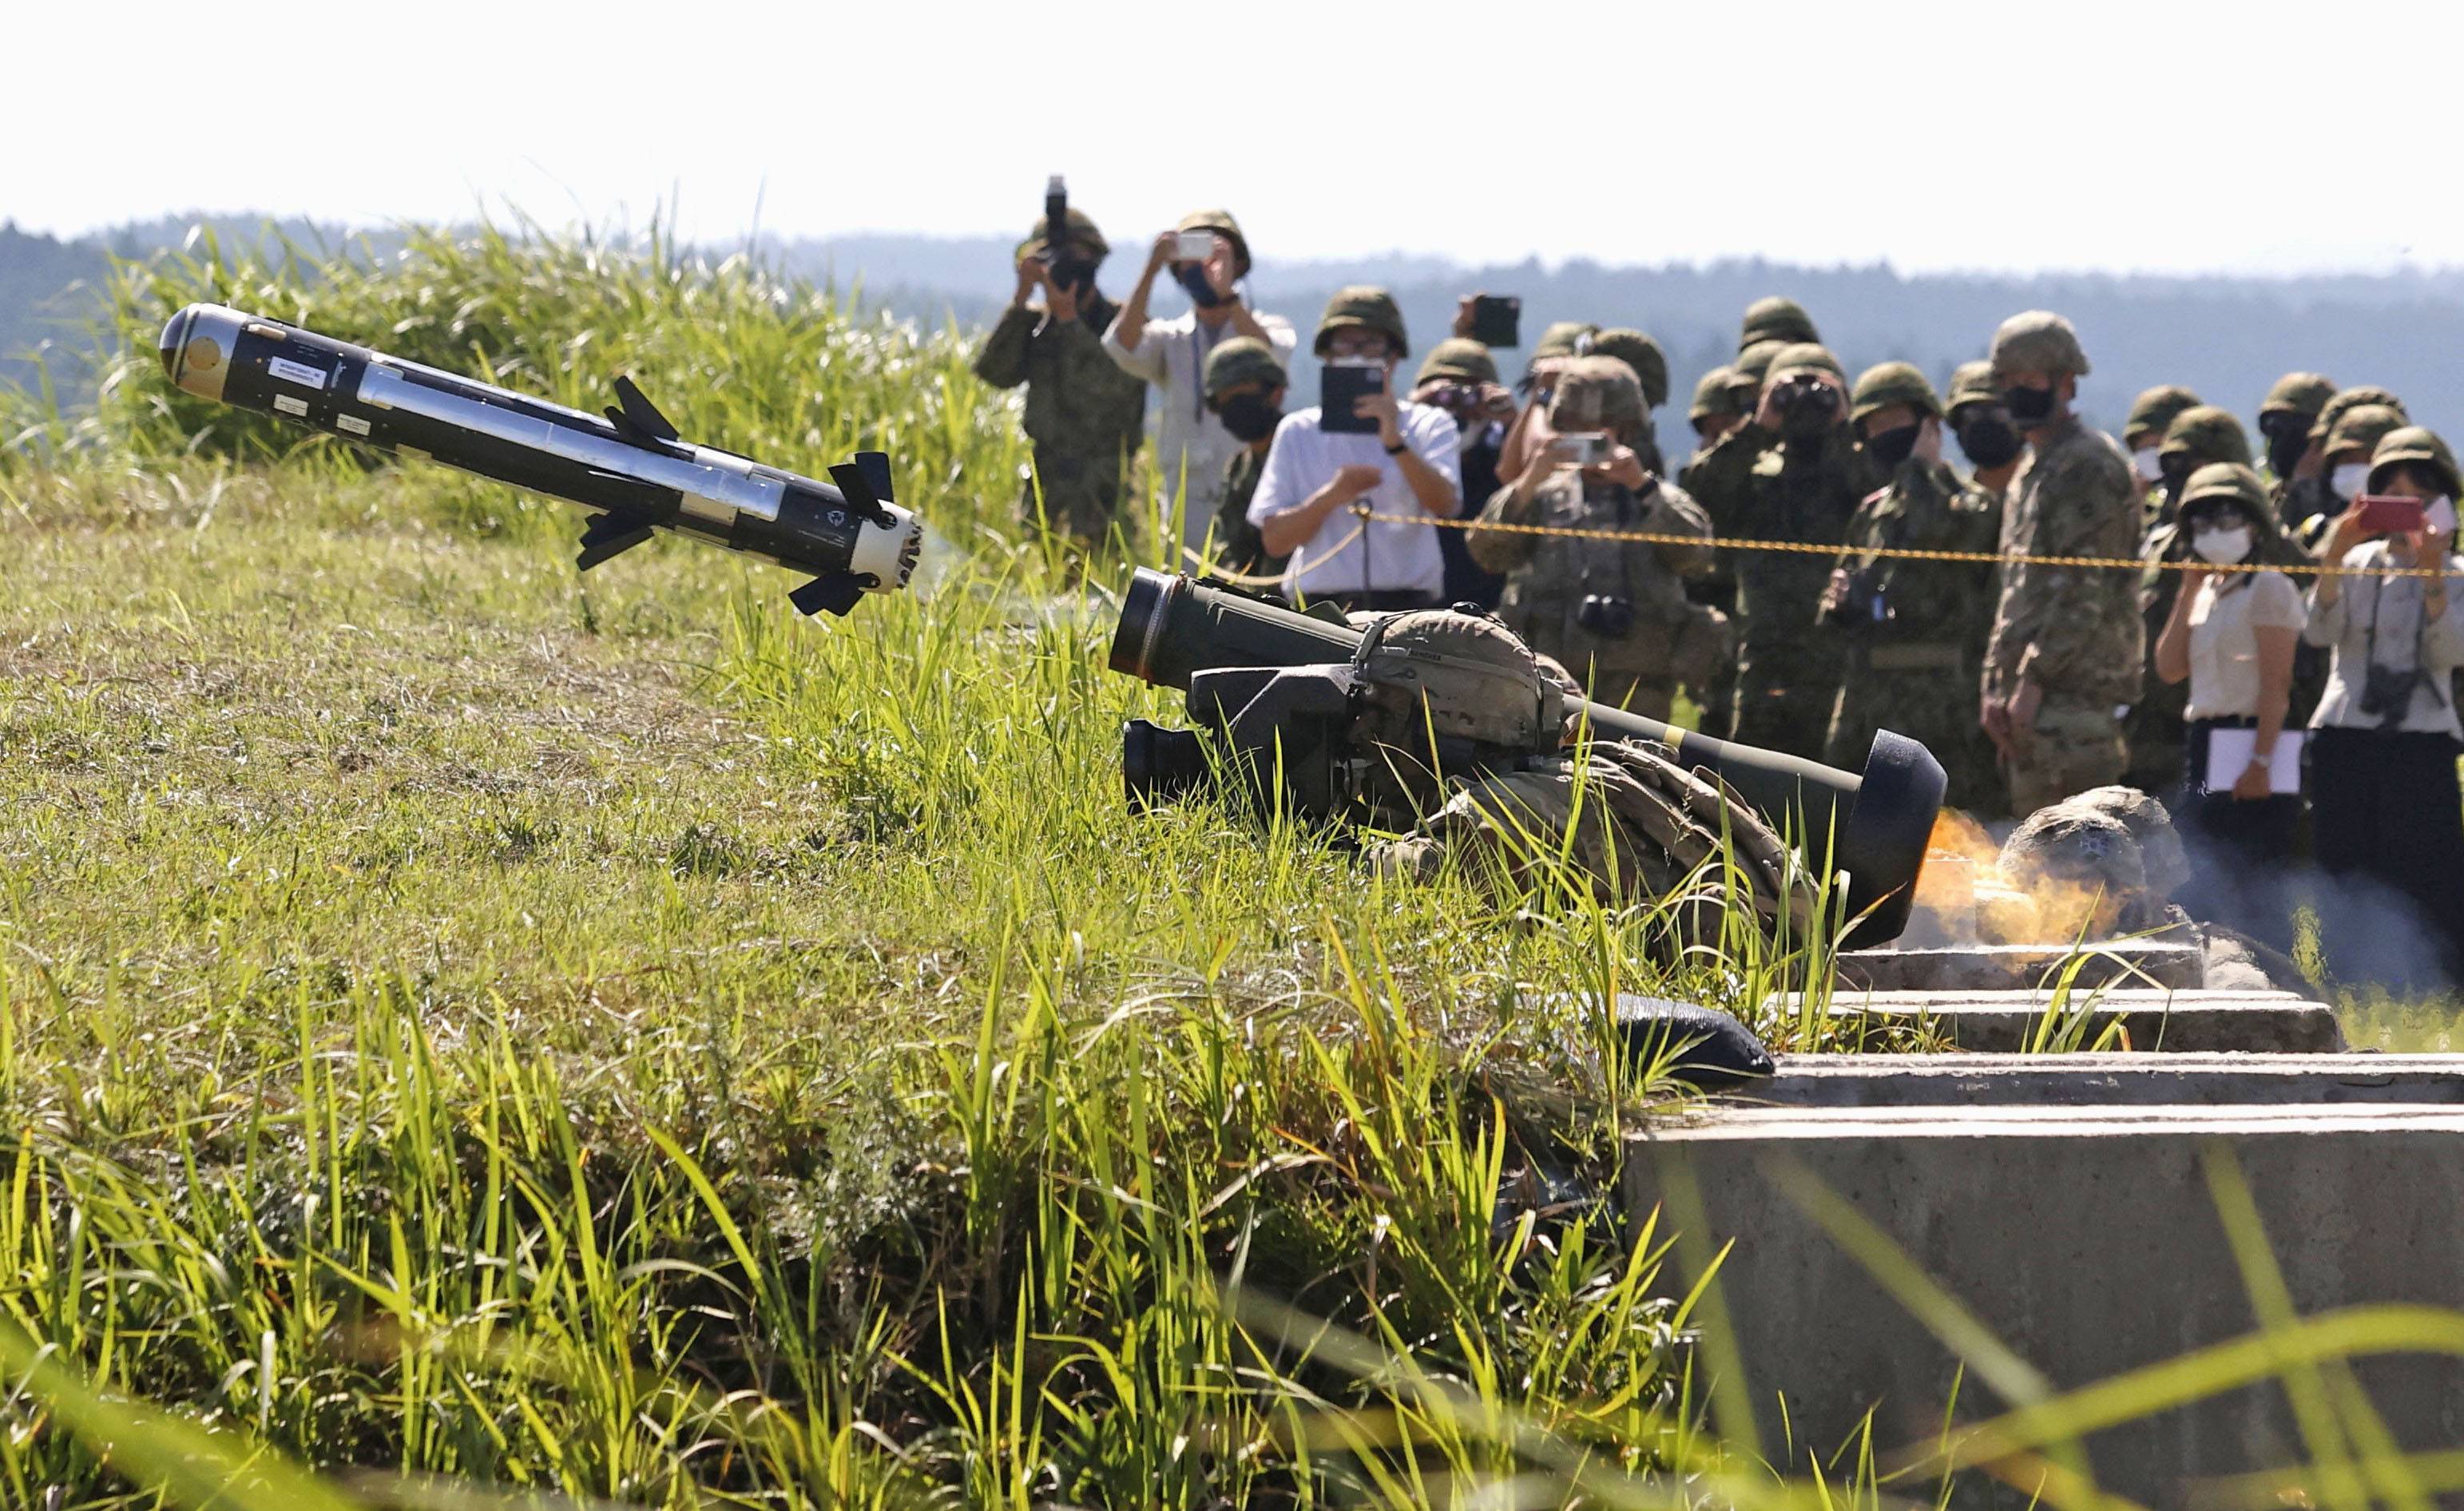 A U.S. Army soldier fires a Javelin anti-tank missile at the Ground Self-Defense Force's Oyanohara Training Area in Yamato, Kumamoto Prefecture, on Sunday. | KYODO